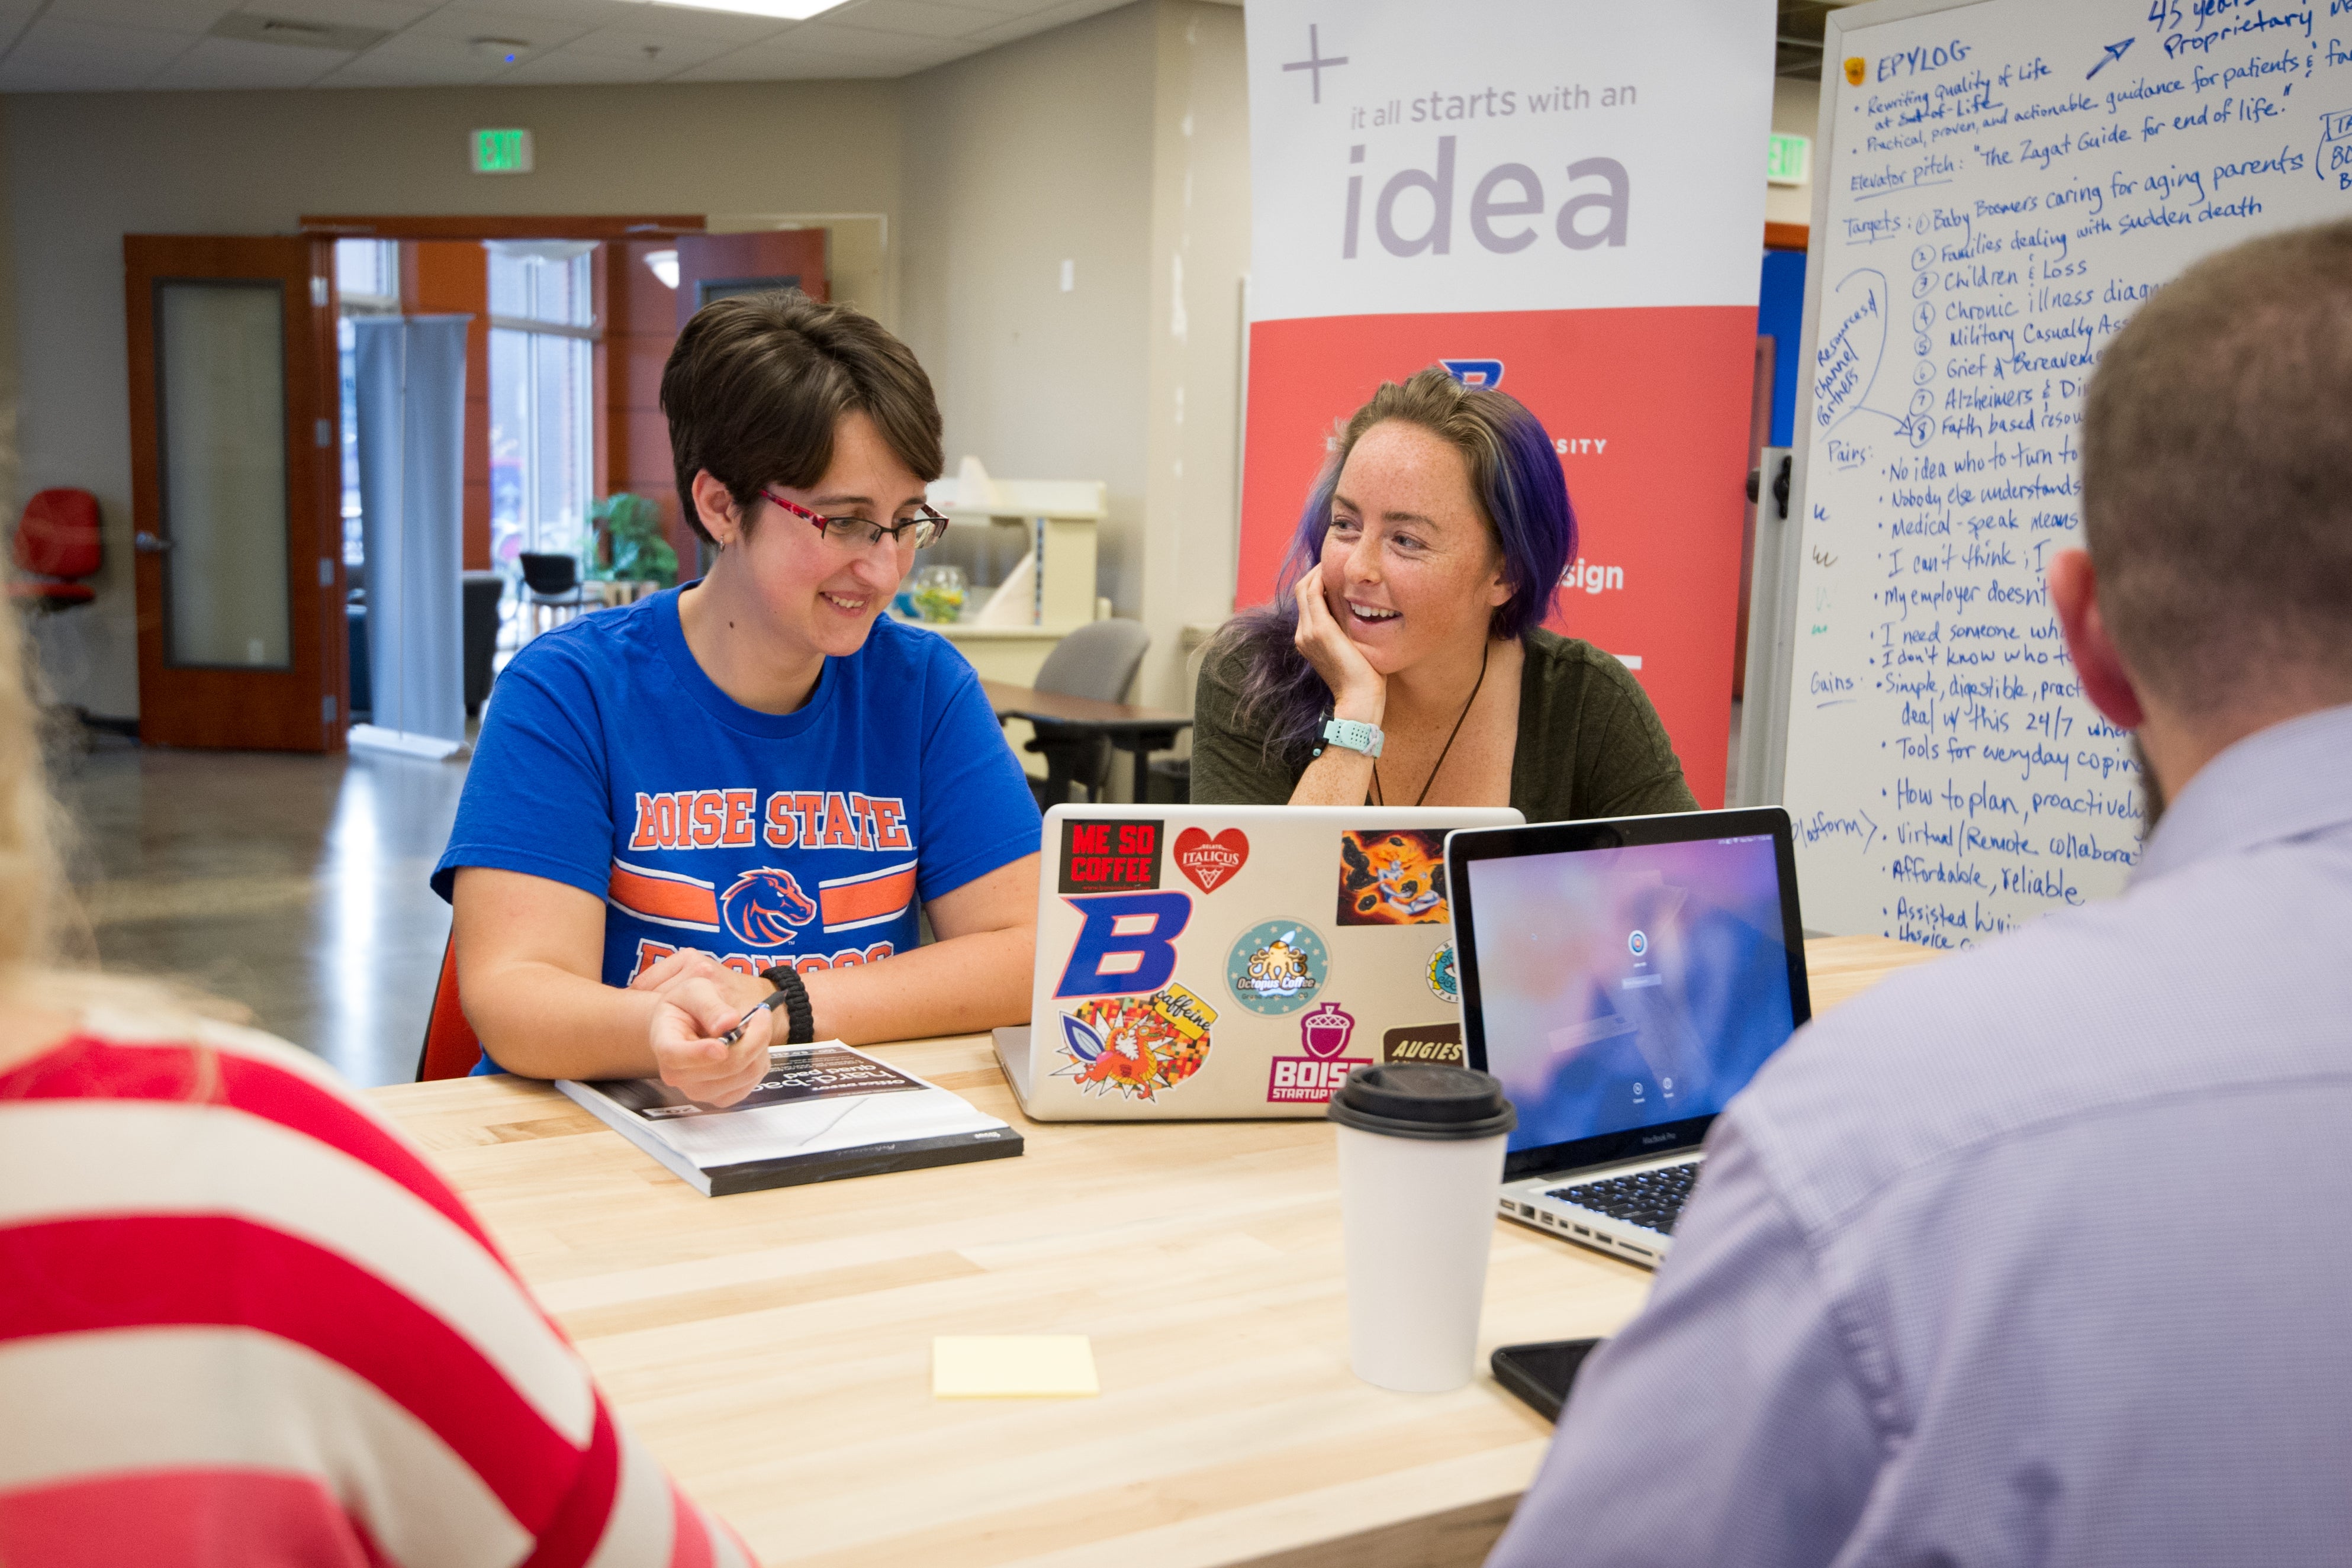 participants work together around a table, it all starts with an idea banner is in background